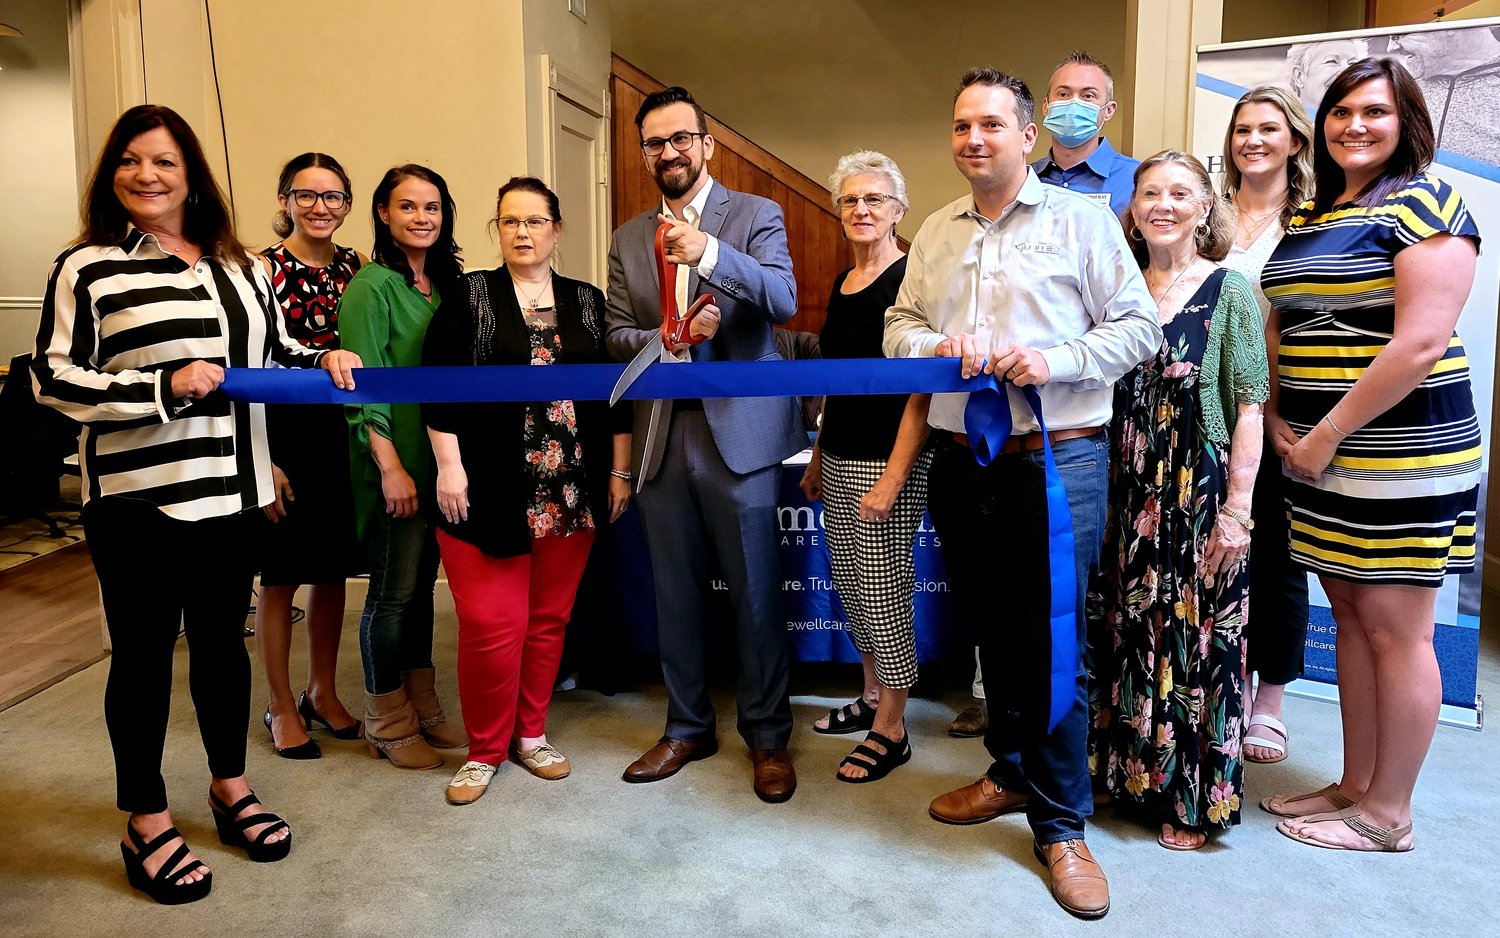 Boris Zecevic, center, opened HomeWell Care Services in March. A ribbon cutting was held on Aug. 19 to commemorate their new office location on the public square.